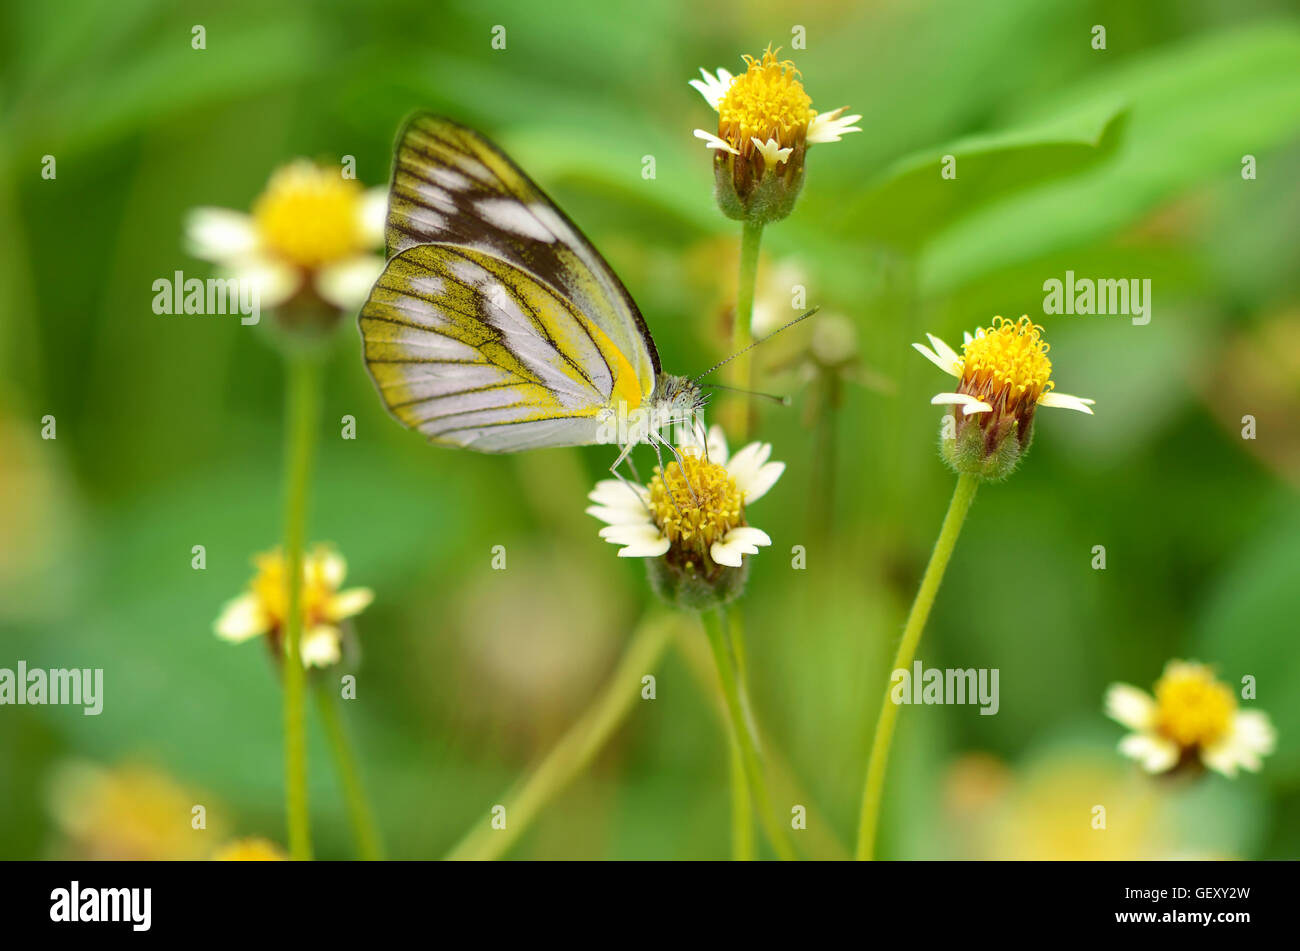 Small butterfly on Mexican daisy flower with natural green background. Stock Photo